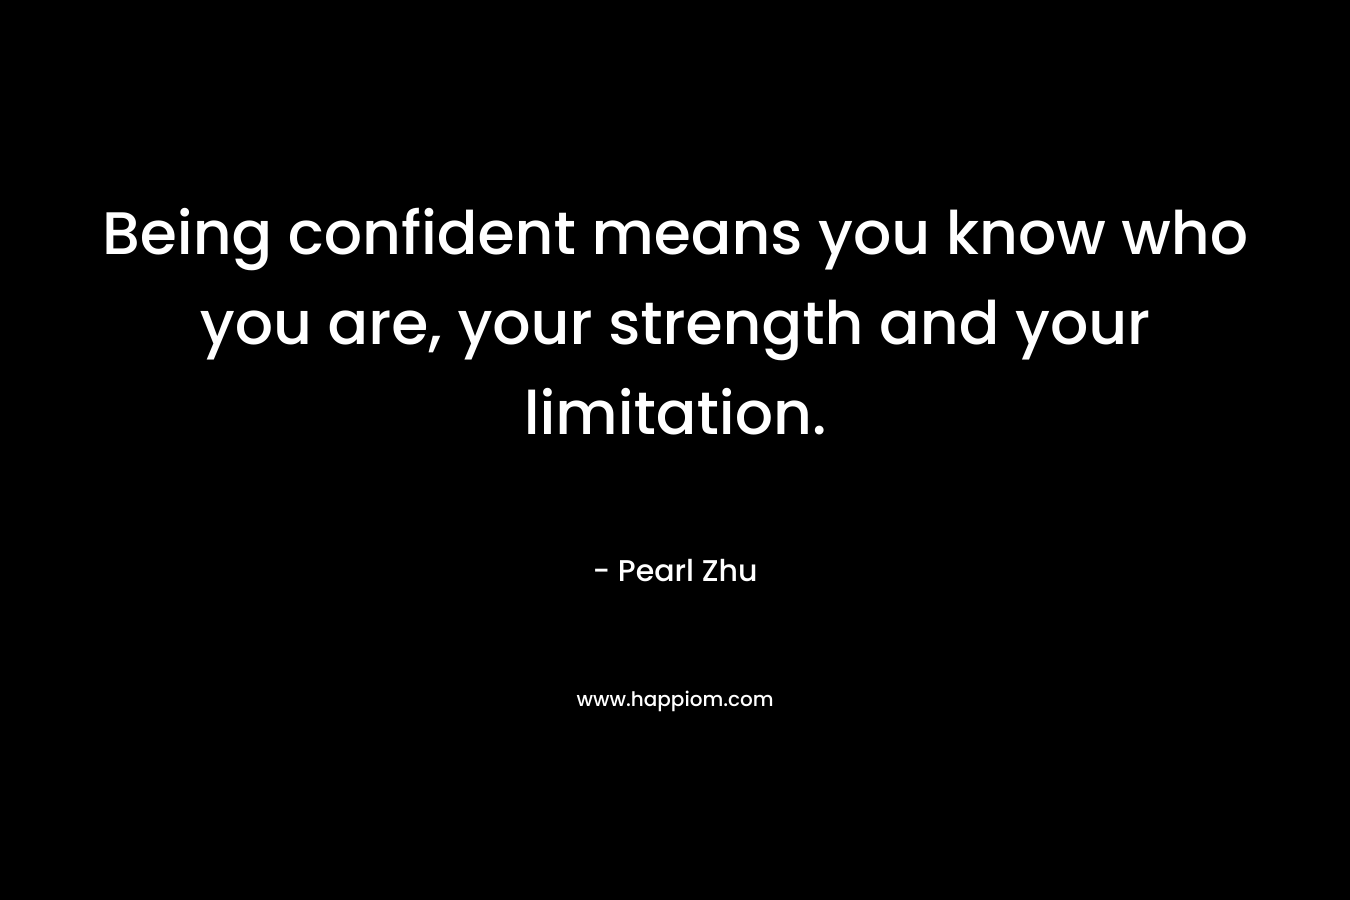 Being confident means you know who you are, your strength and your limitation.